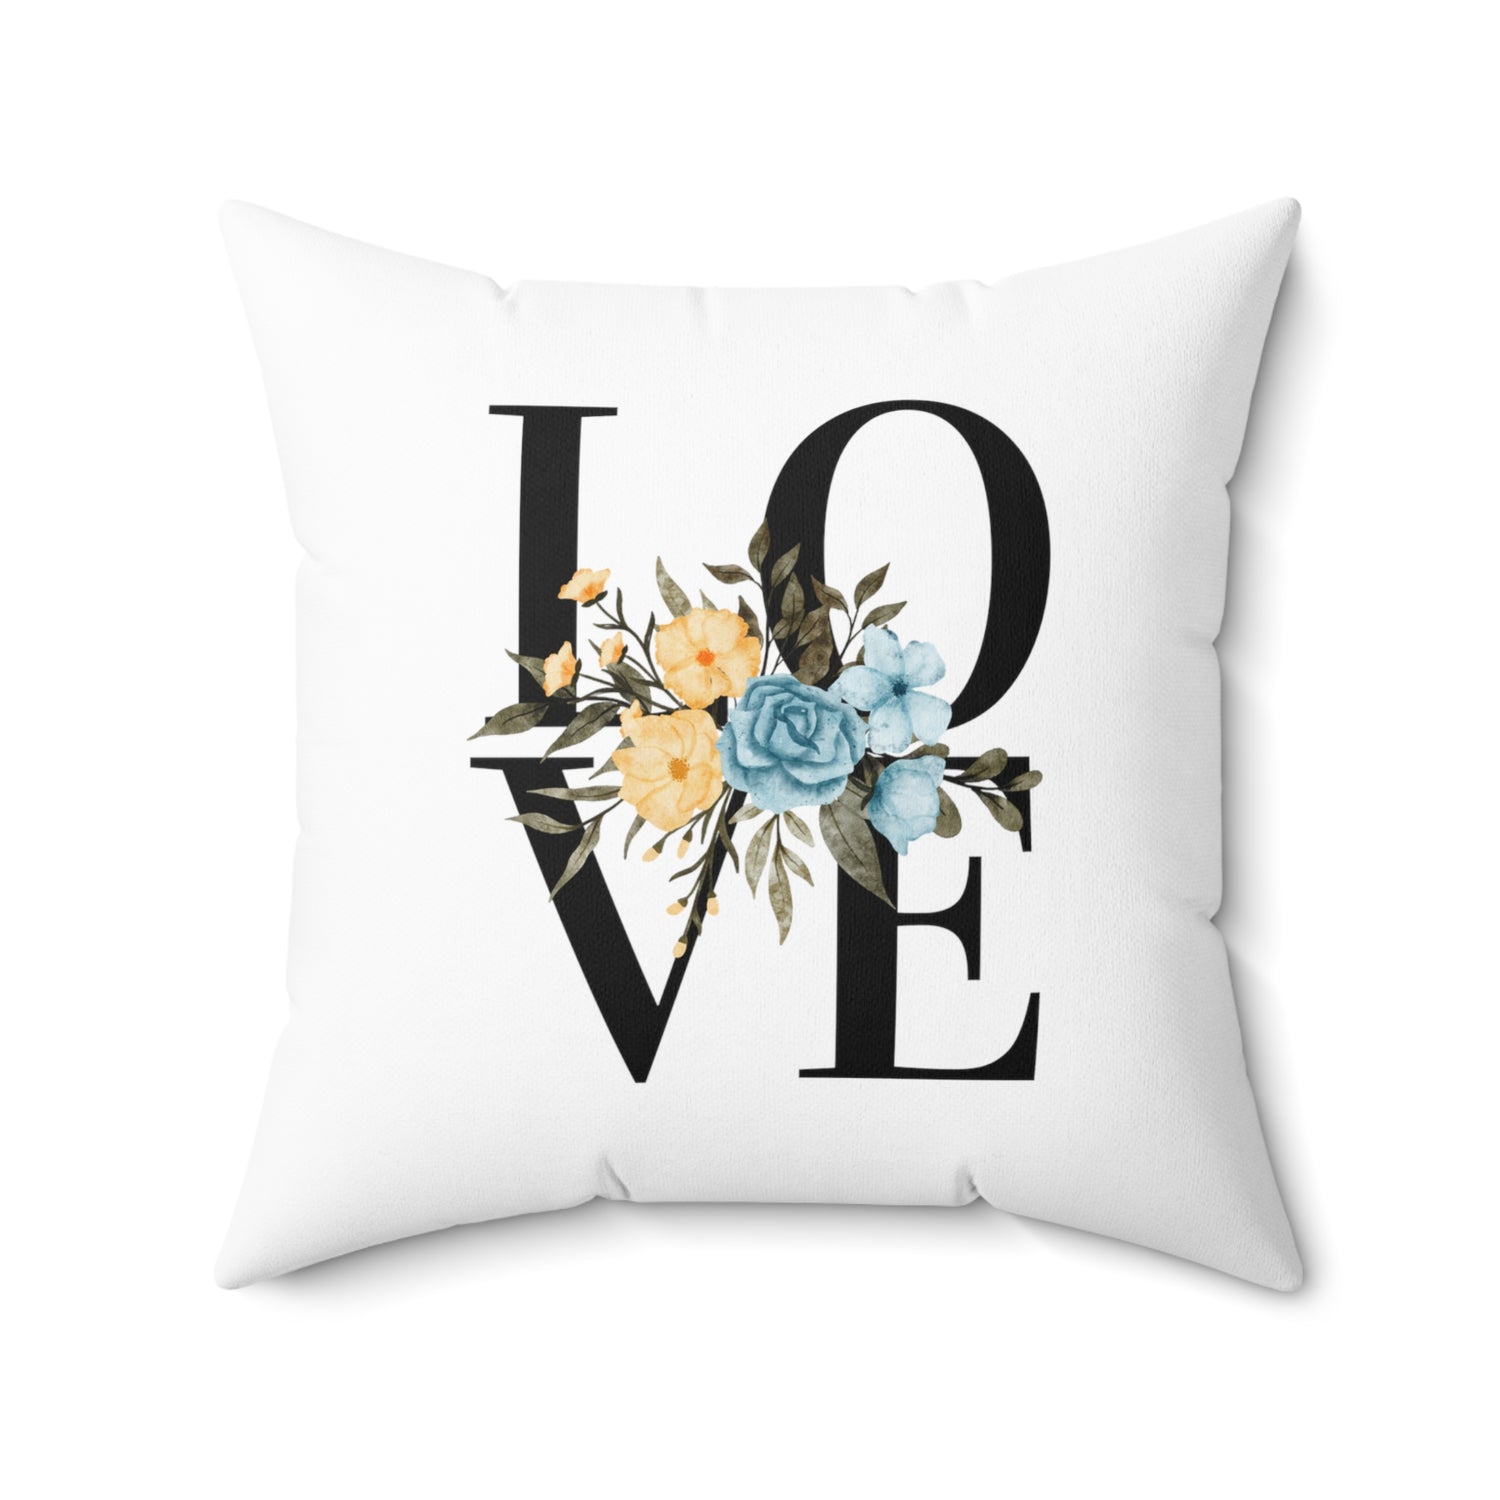 Love Throw Pillow: Perfect Accent for Home &amp; Heart